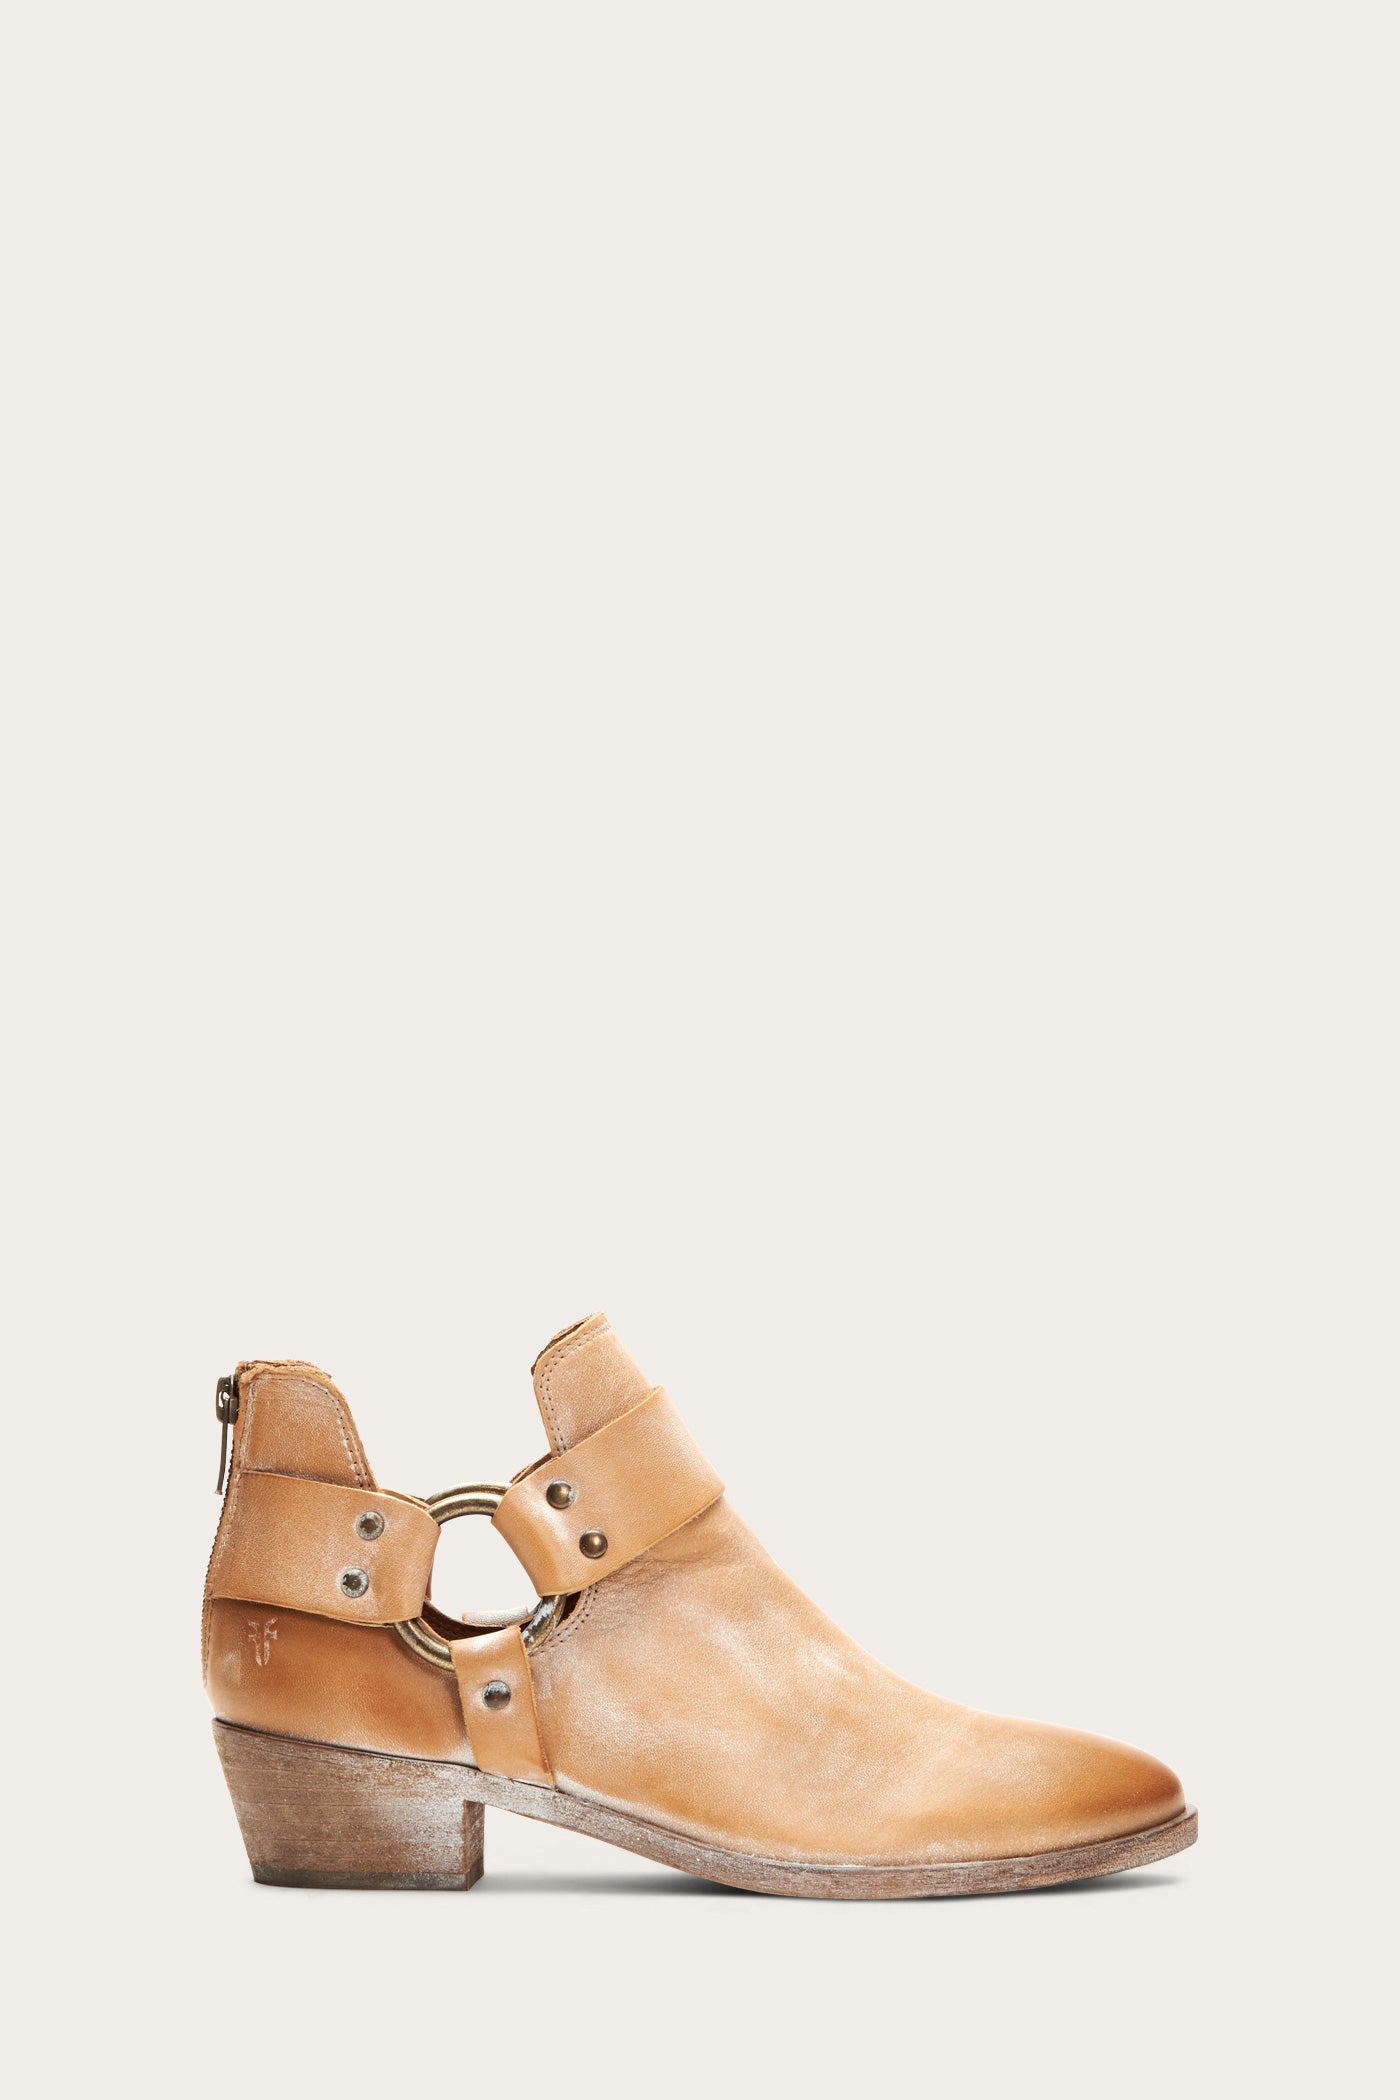 frye ray low harness bootie